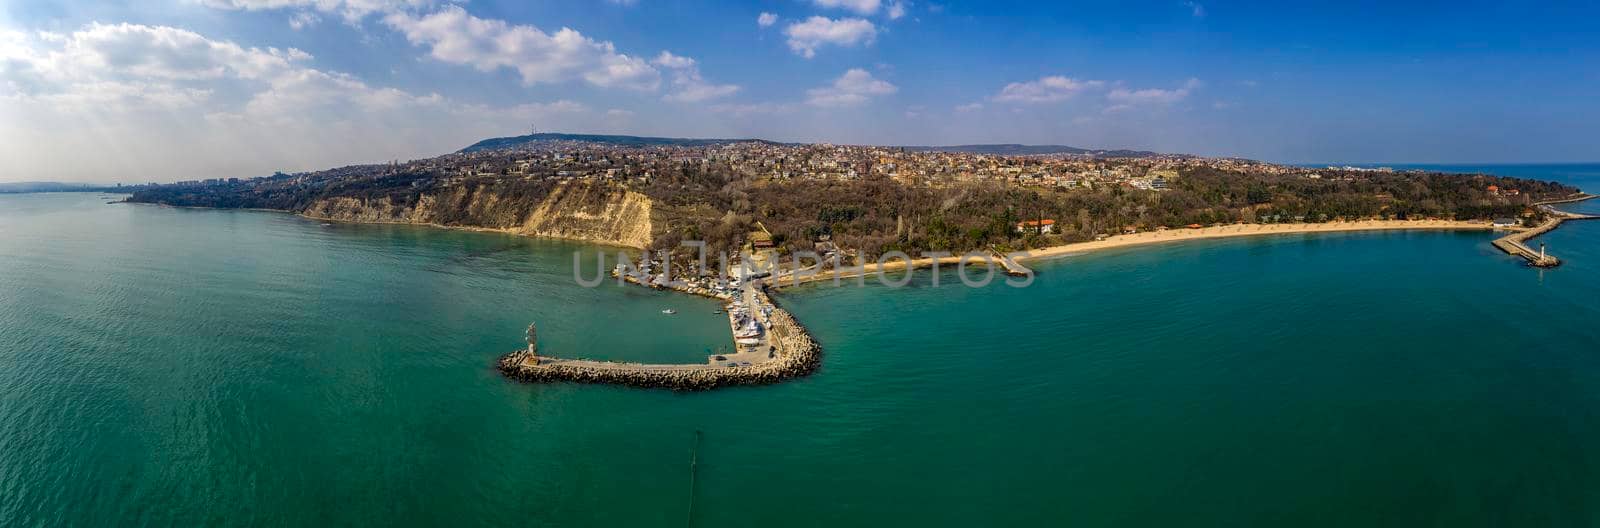 Aerial view from drone of coastline with breakwater  near Varna city, Bulgaria. High resolution